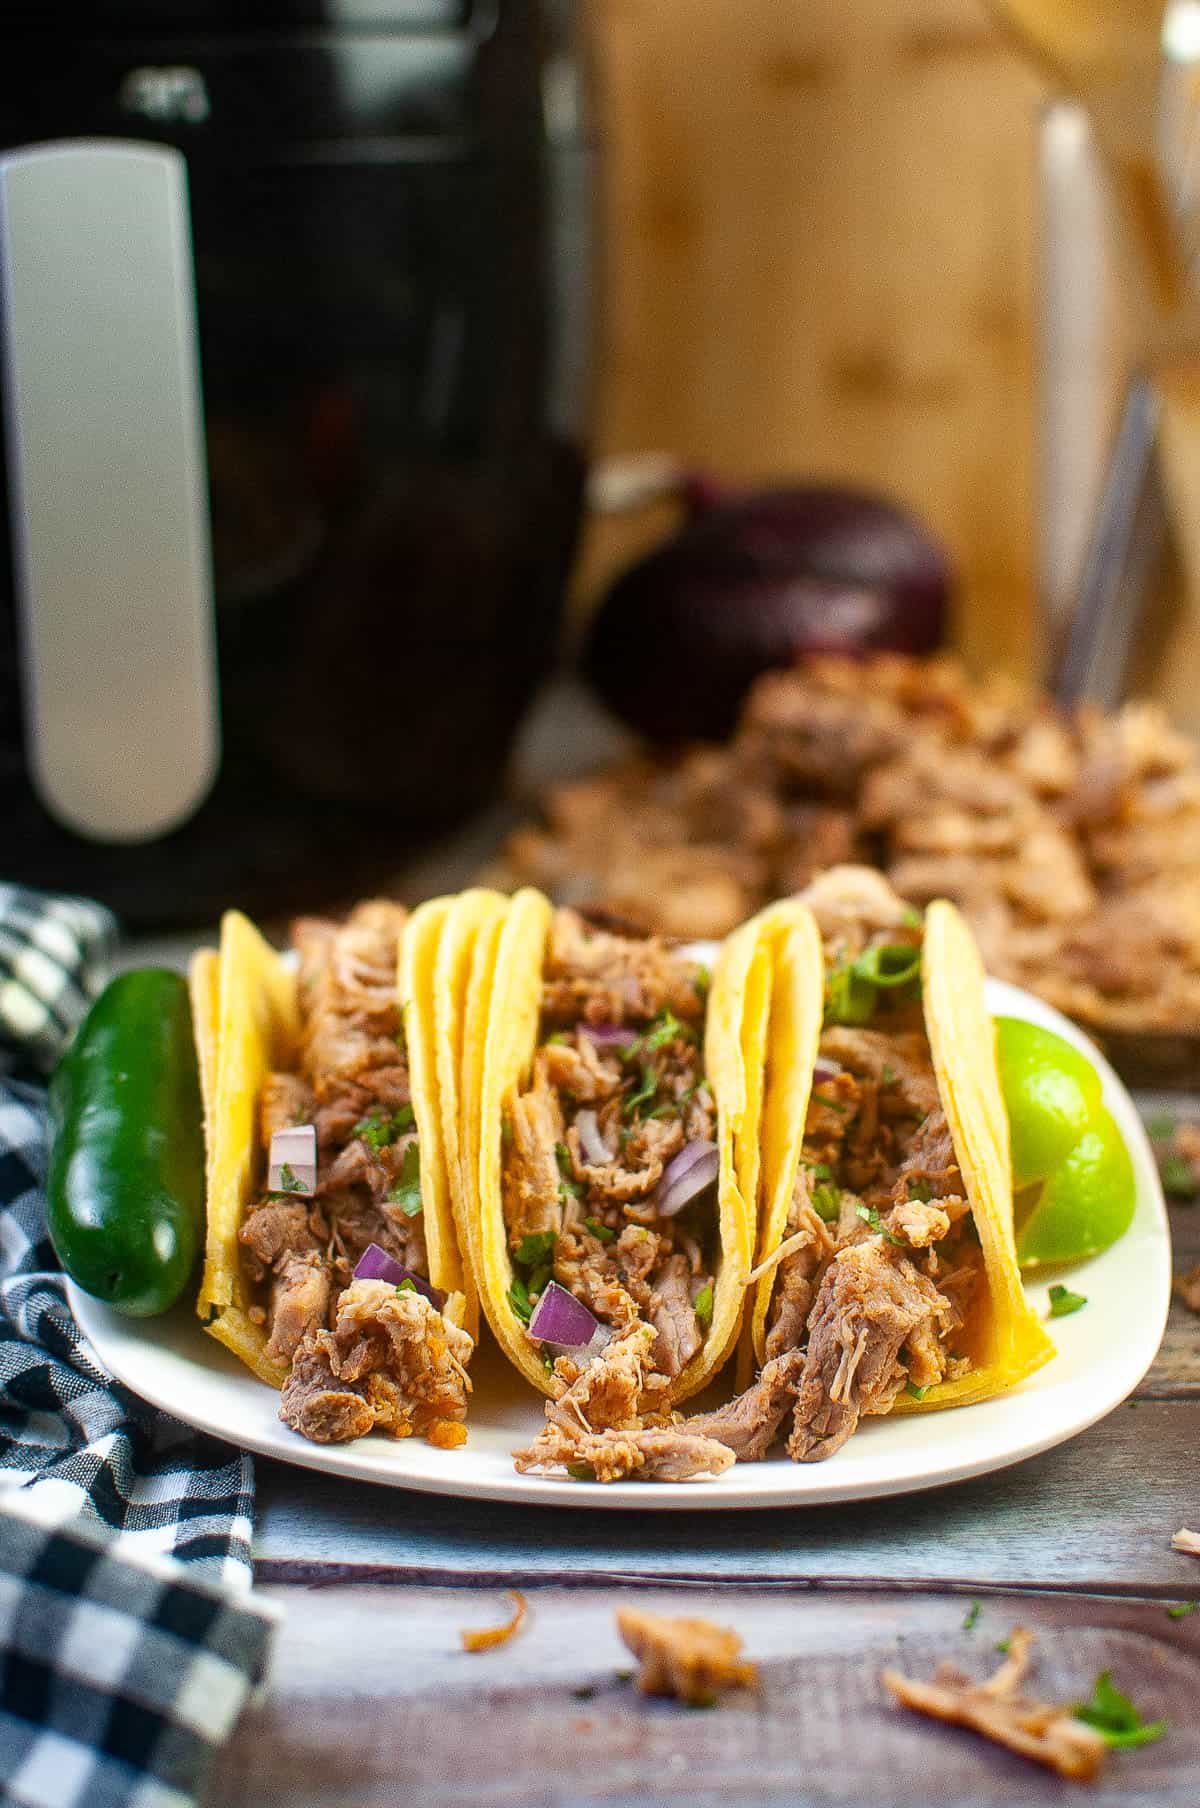 Low angle shot of carnitas tacos with carnitas meat and an air fryer in the background.